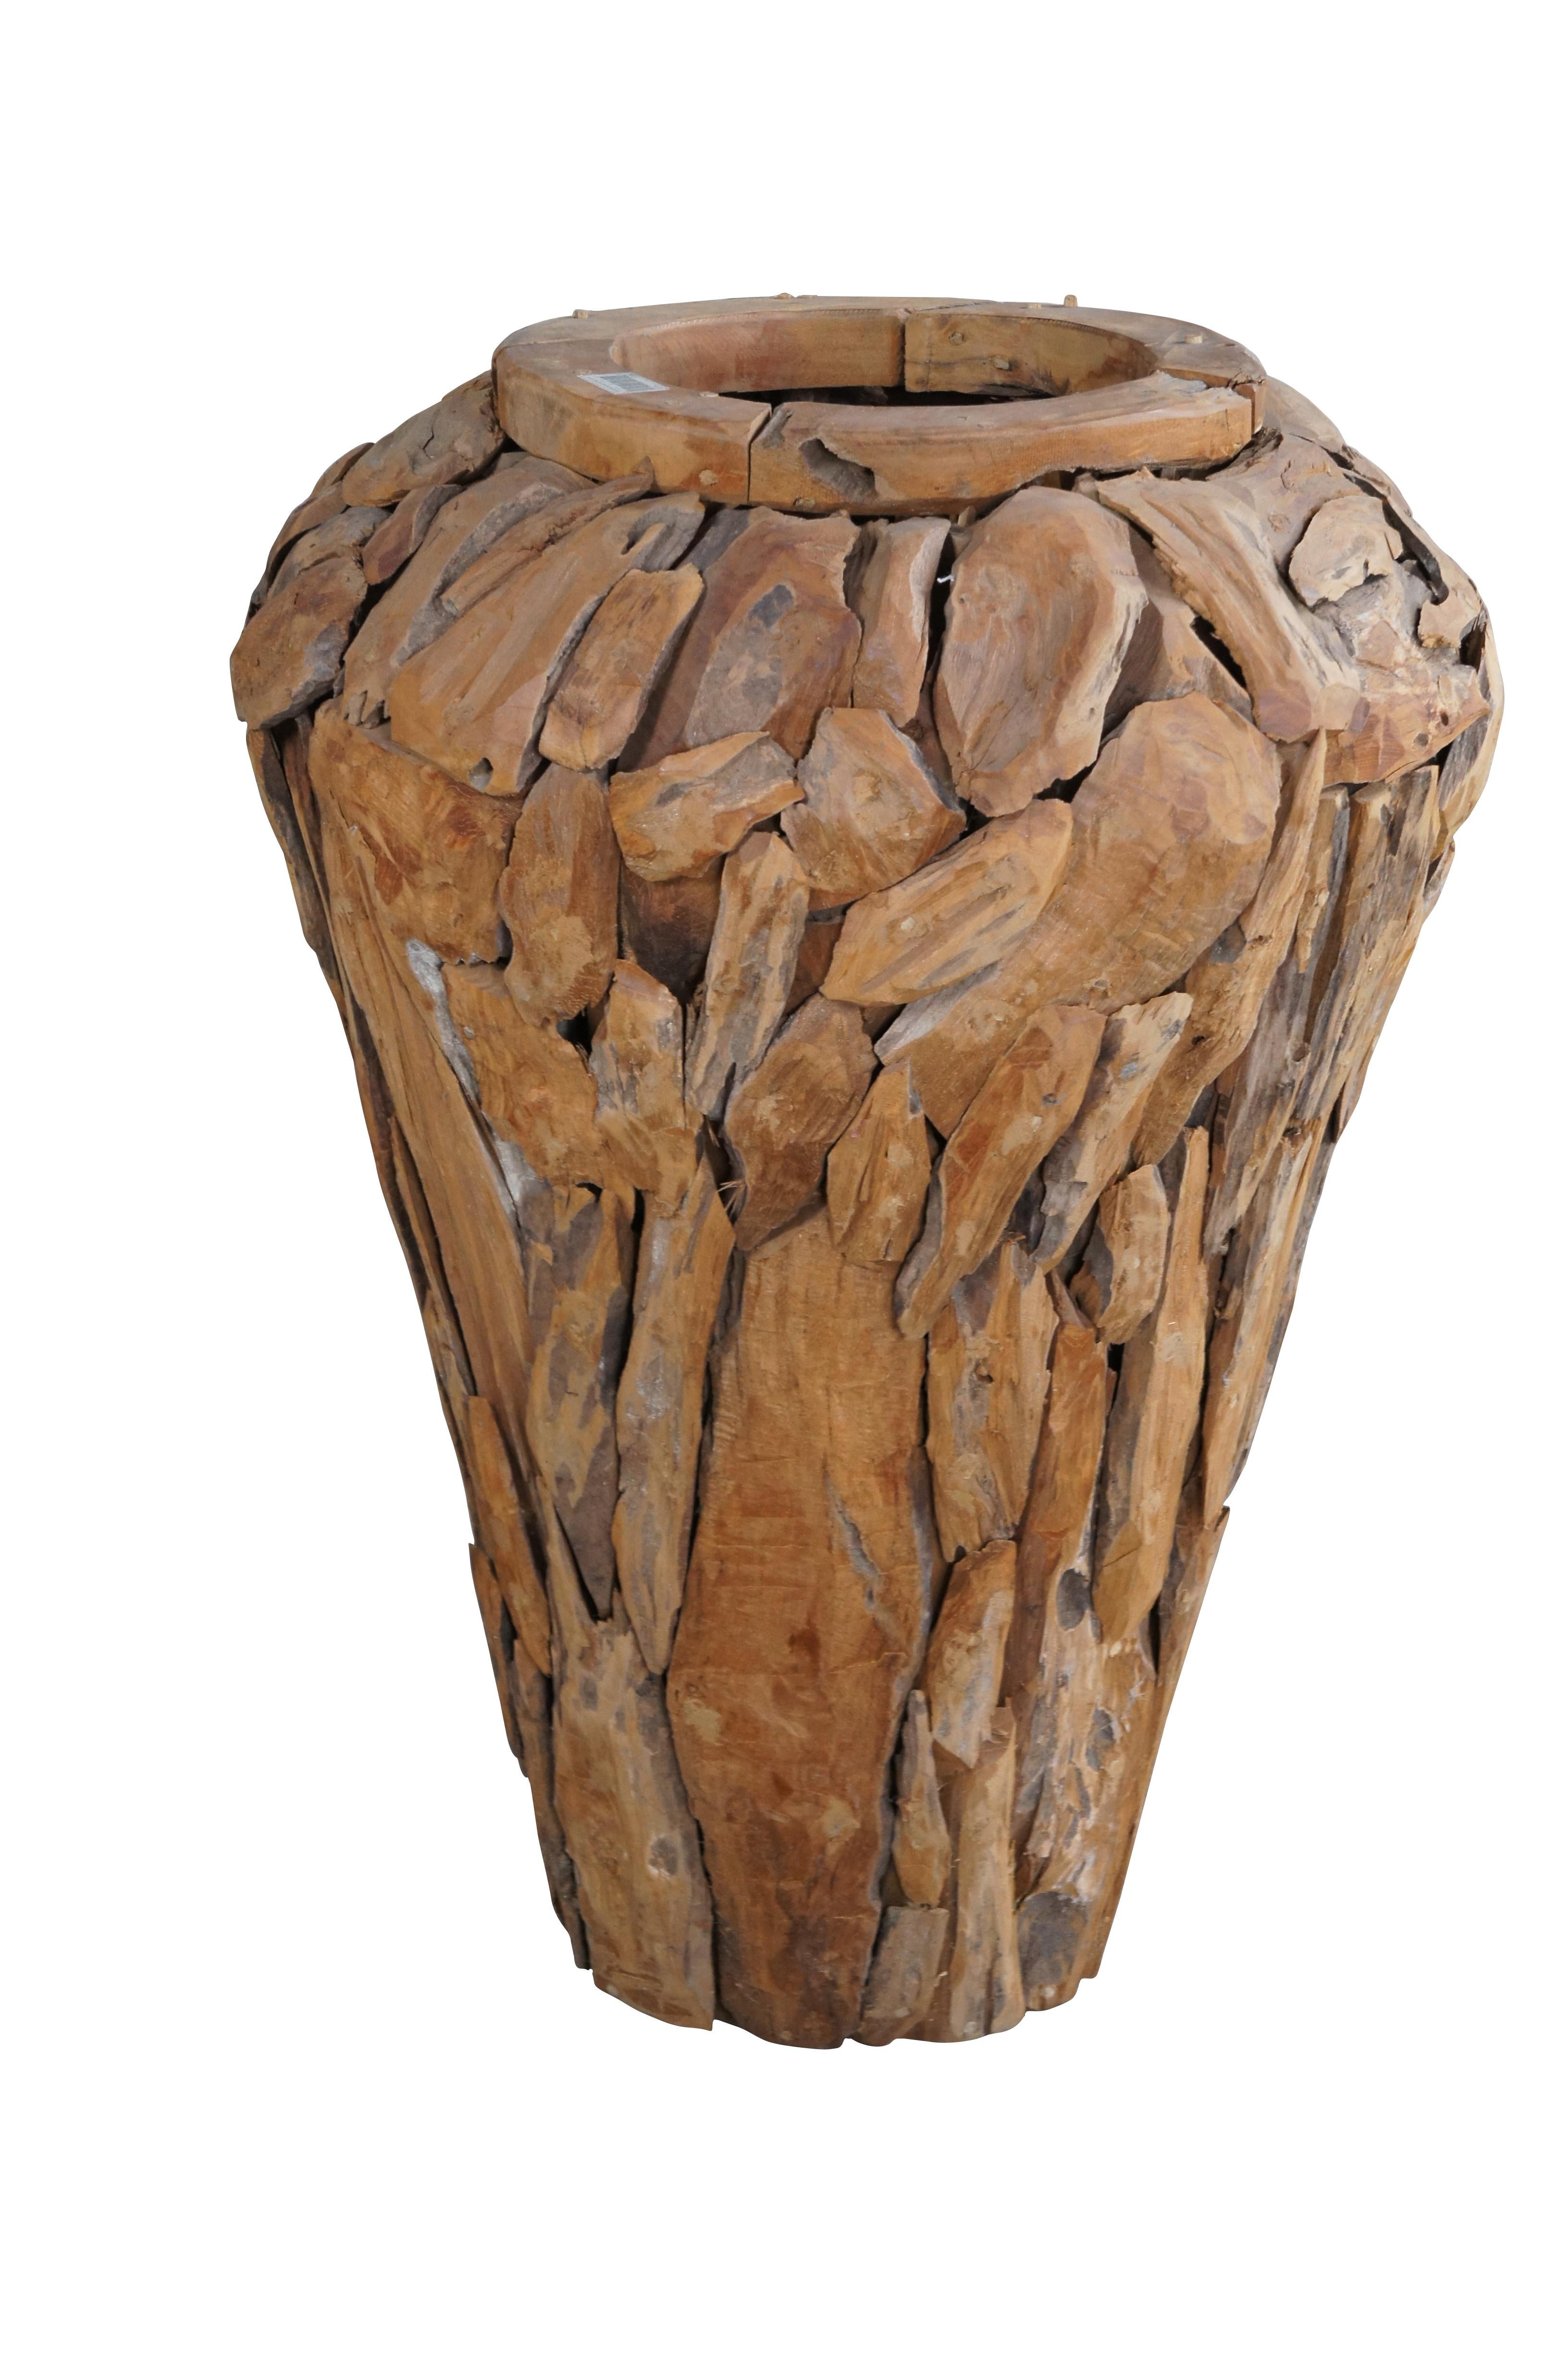 Reclaimed Teak Floor Vase. Great for interior and outdoor use.

Dimensions:
22